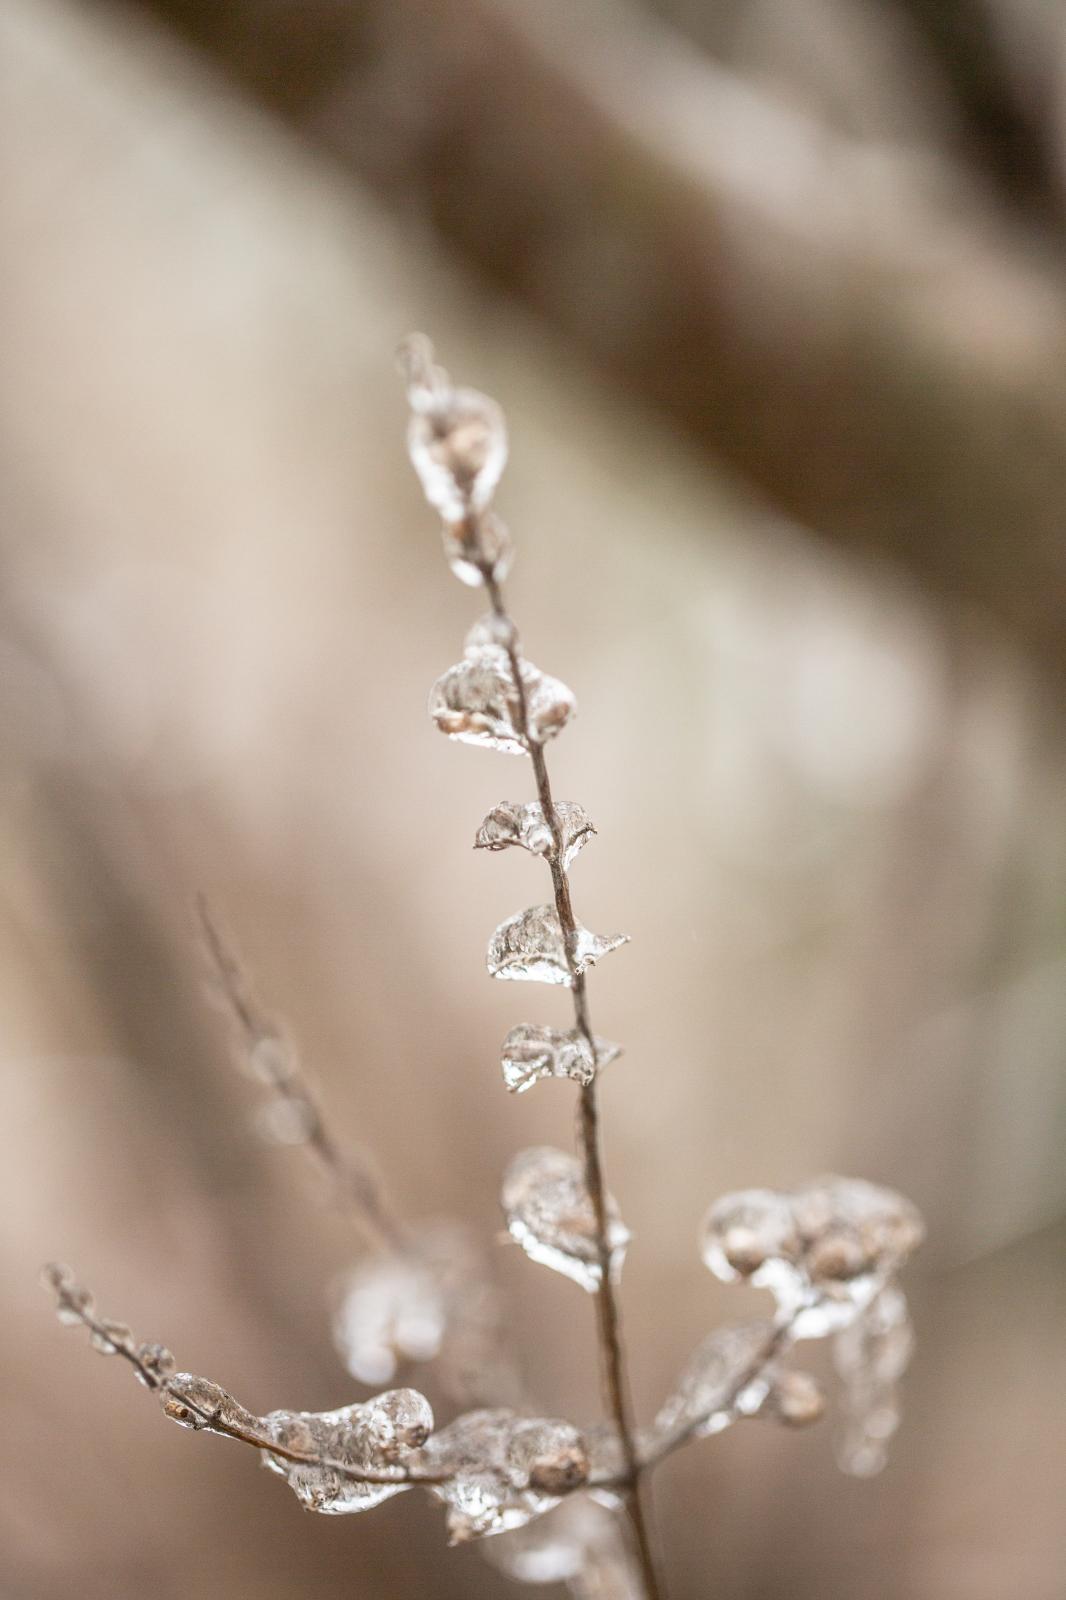 BEAUTY AS A WARNING   - Beads of ice poised on a slender twig, Central Texas, February, 2023.